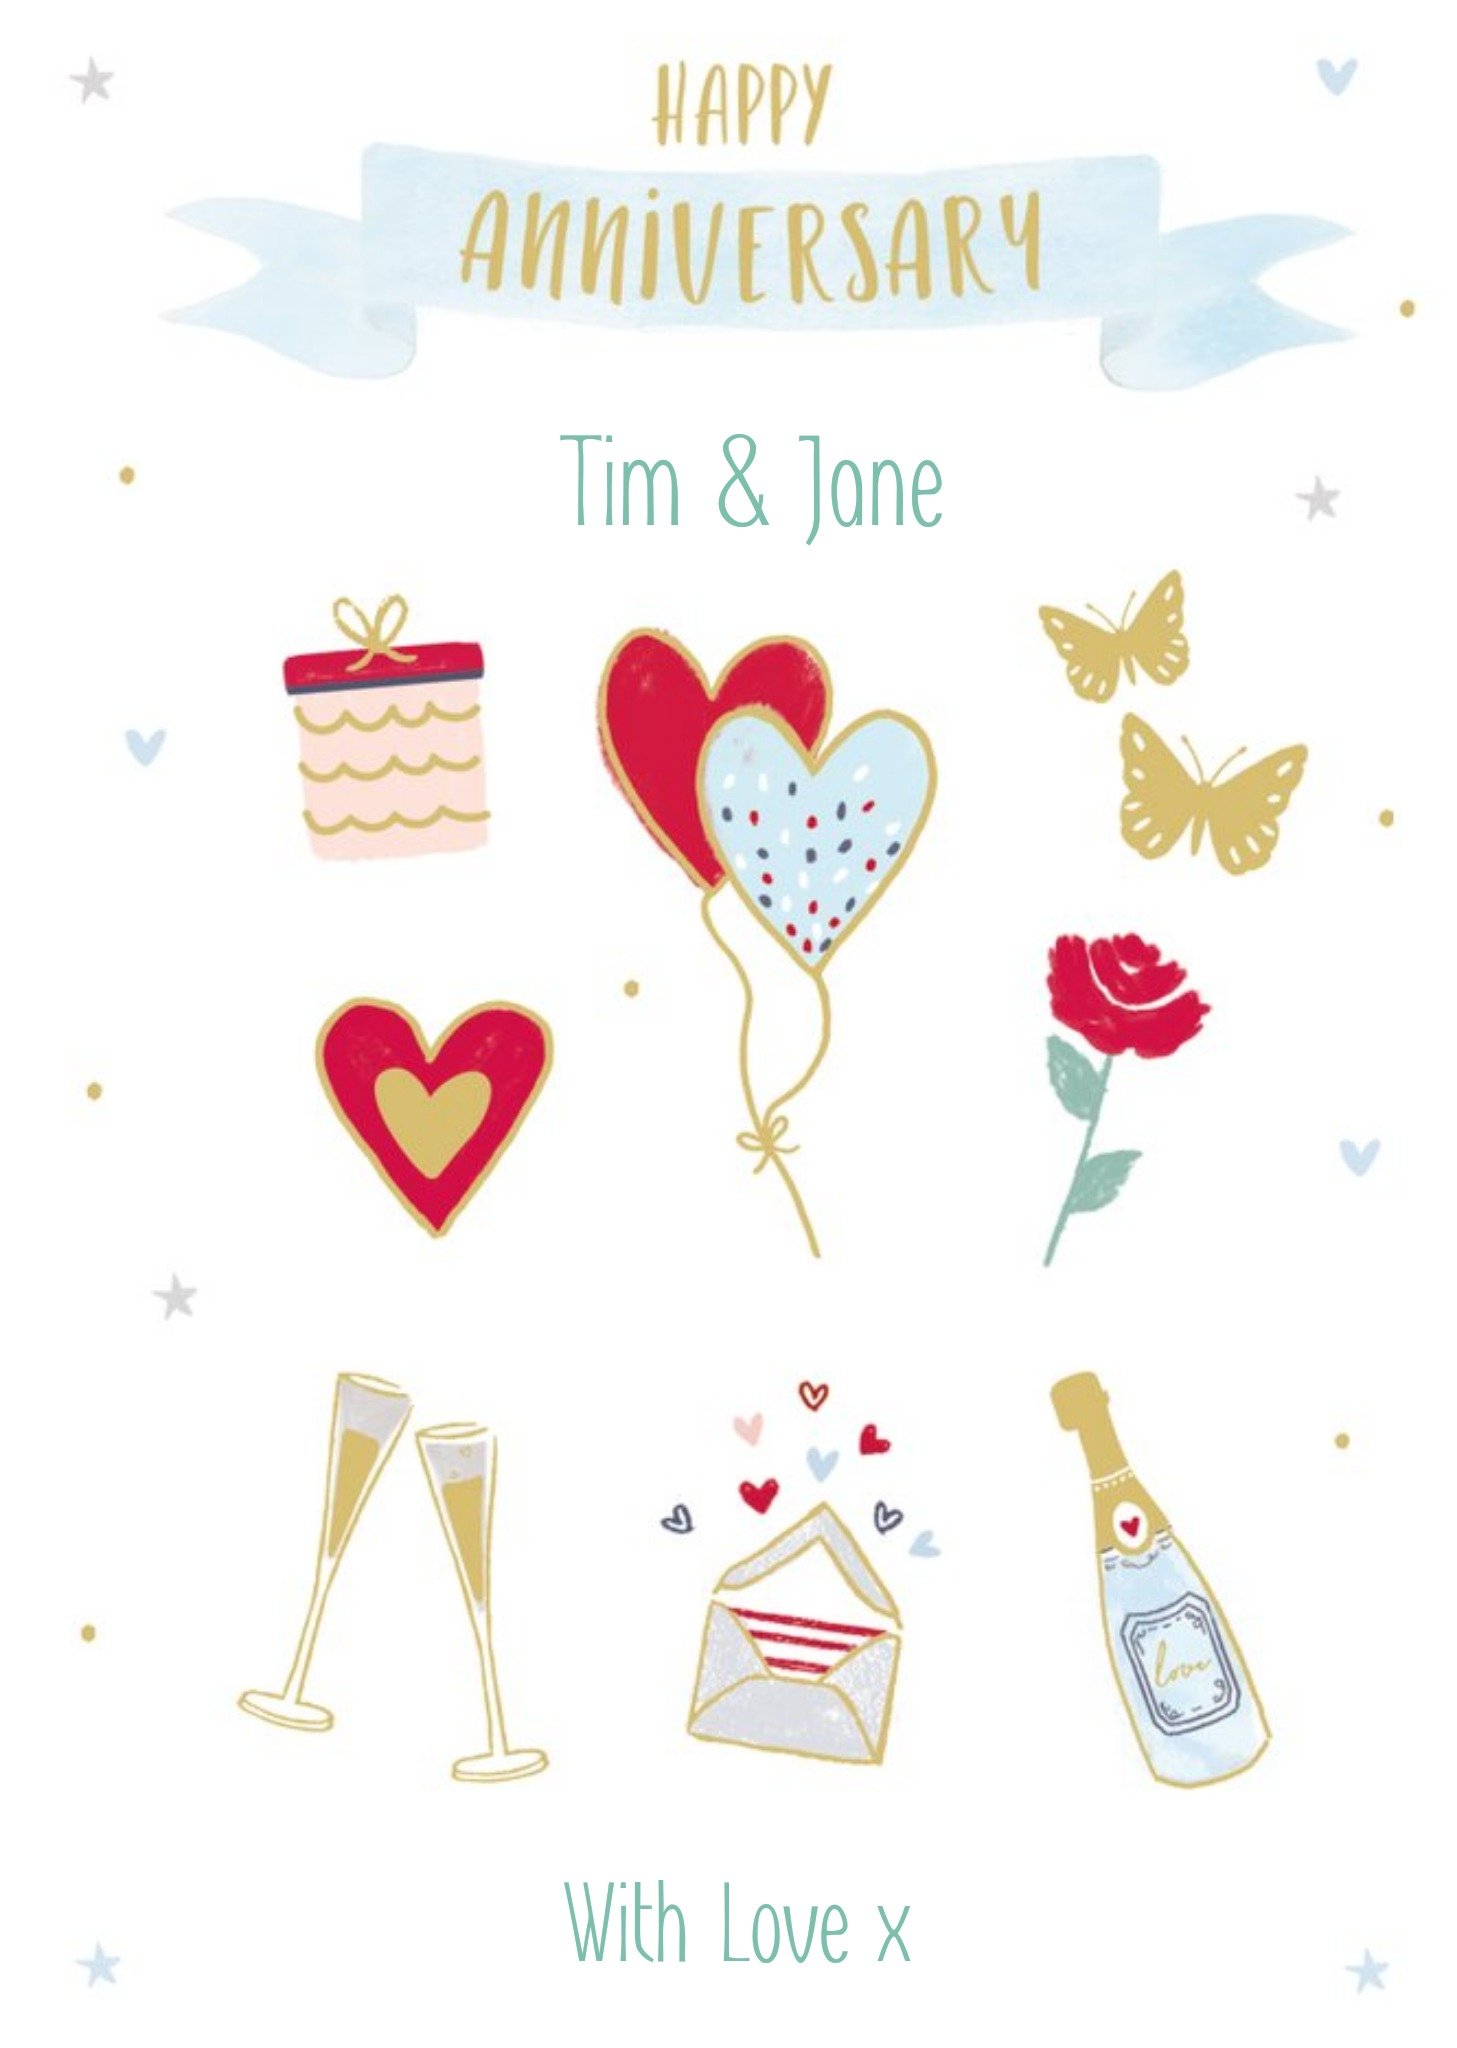 Moonpig Various Spot Illustrations Of Anniversary Gifts Happy Anniversary Card, Large